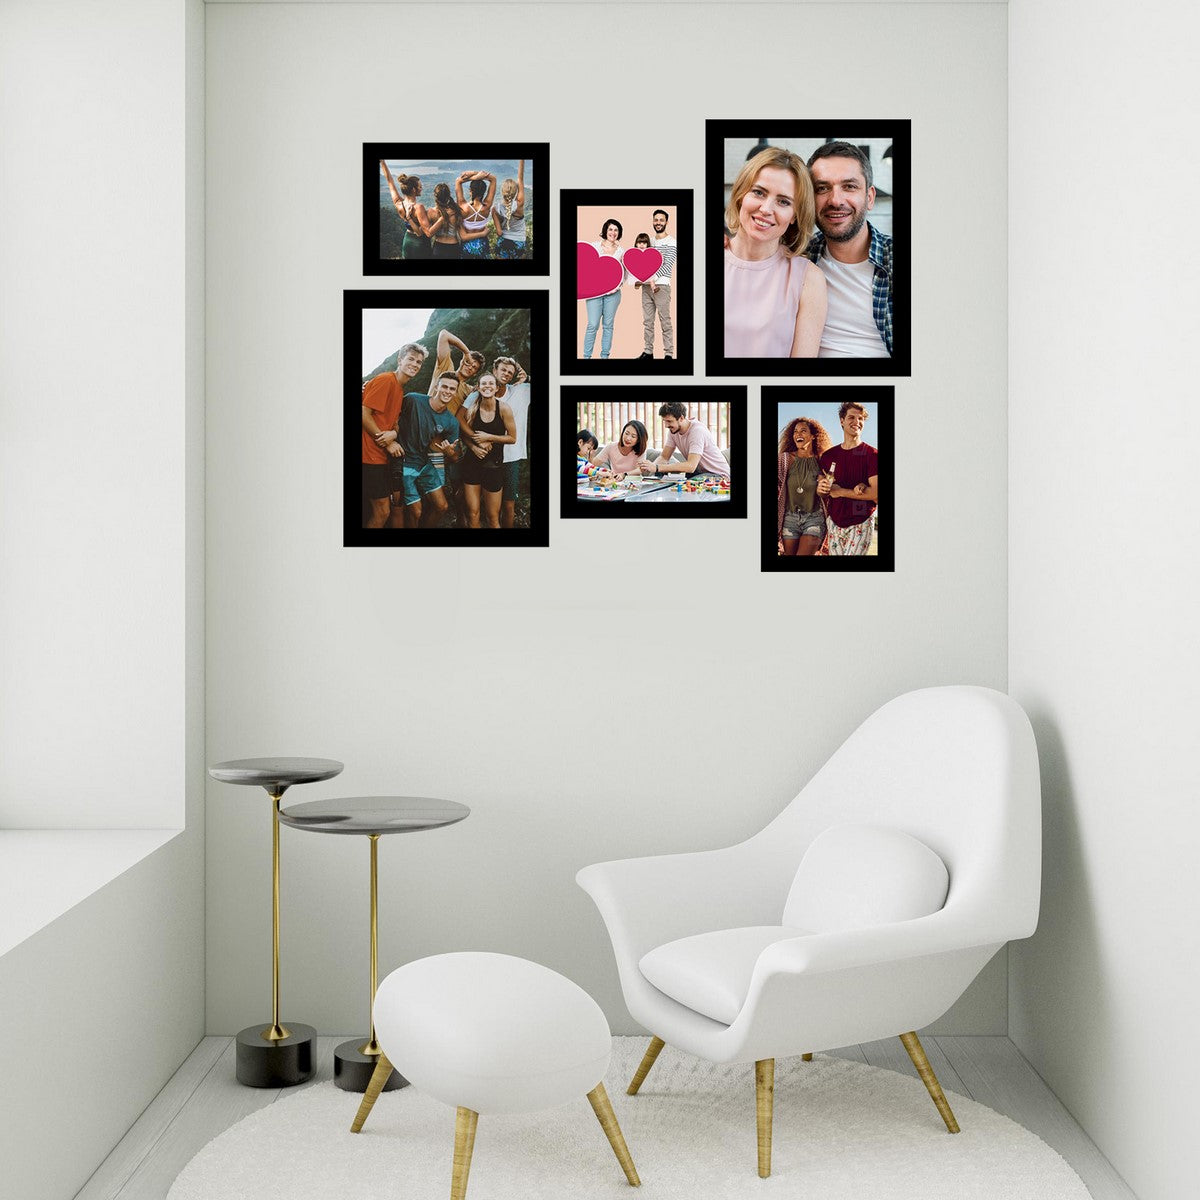 Memory Wall Collage Photo Frame - Set of 6 Photo Frames for 4 Photos of 5"x7", 2 Photos of 8"x10" 2